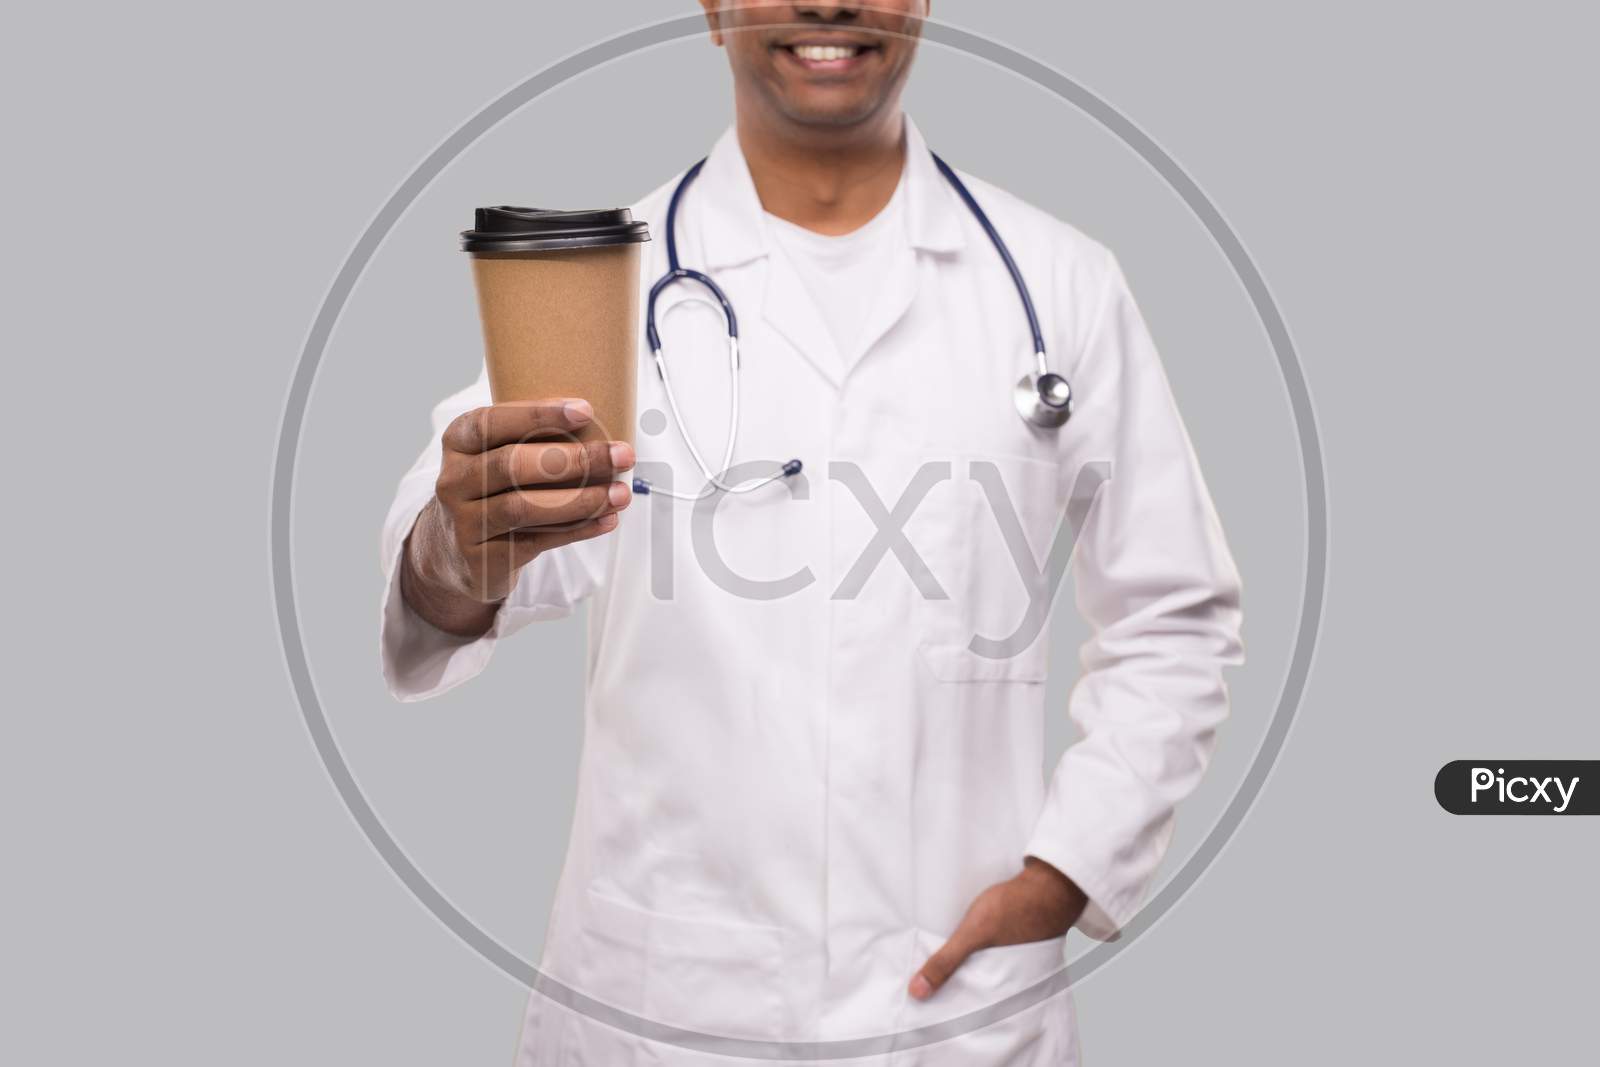 Doctor Holding Coffee Take Away Cup Smiling Isolated. Indian Man Doctor Holding Coffee To Go Cup.